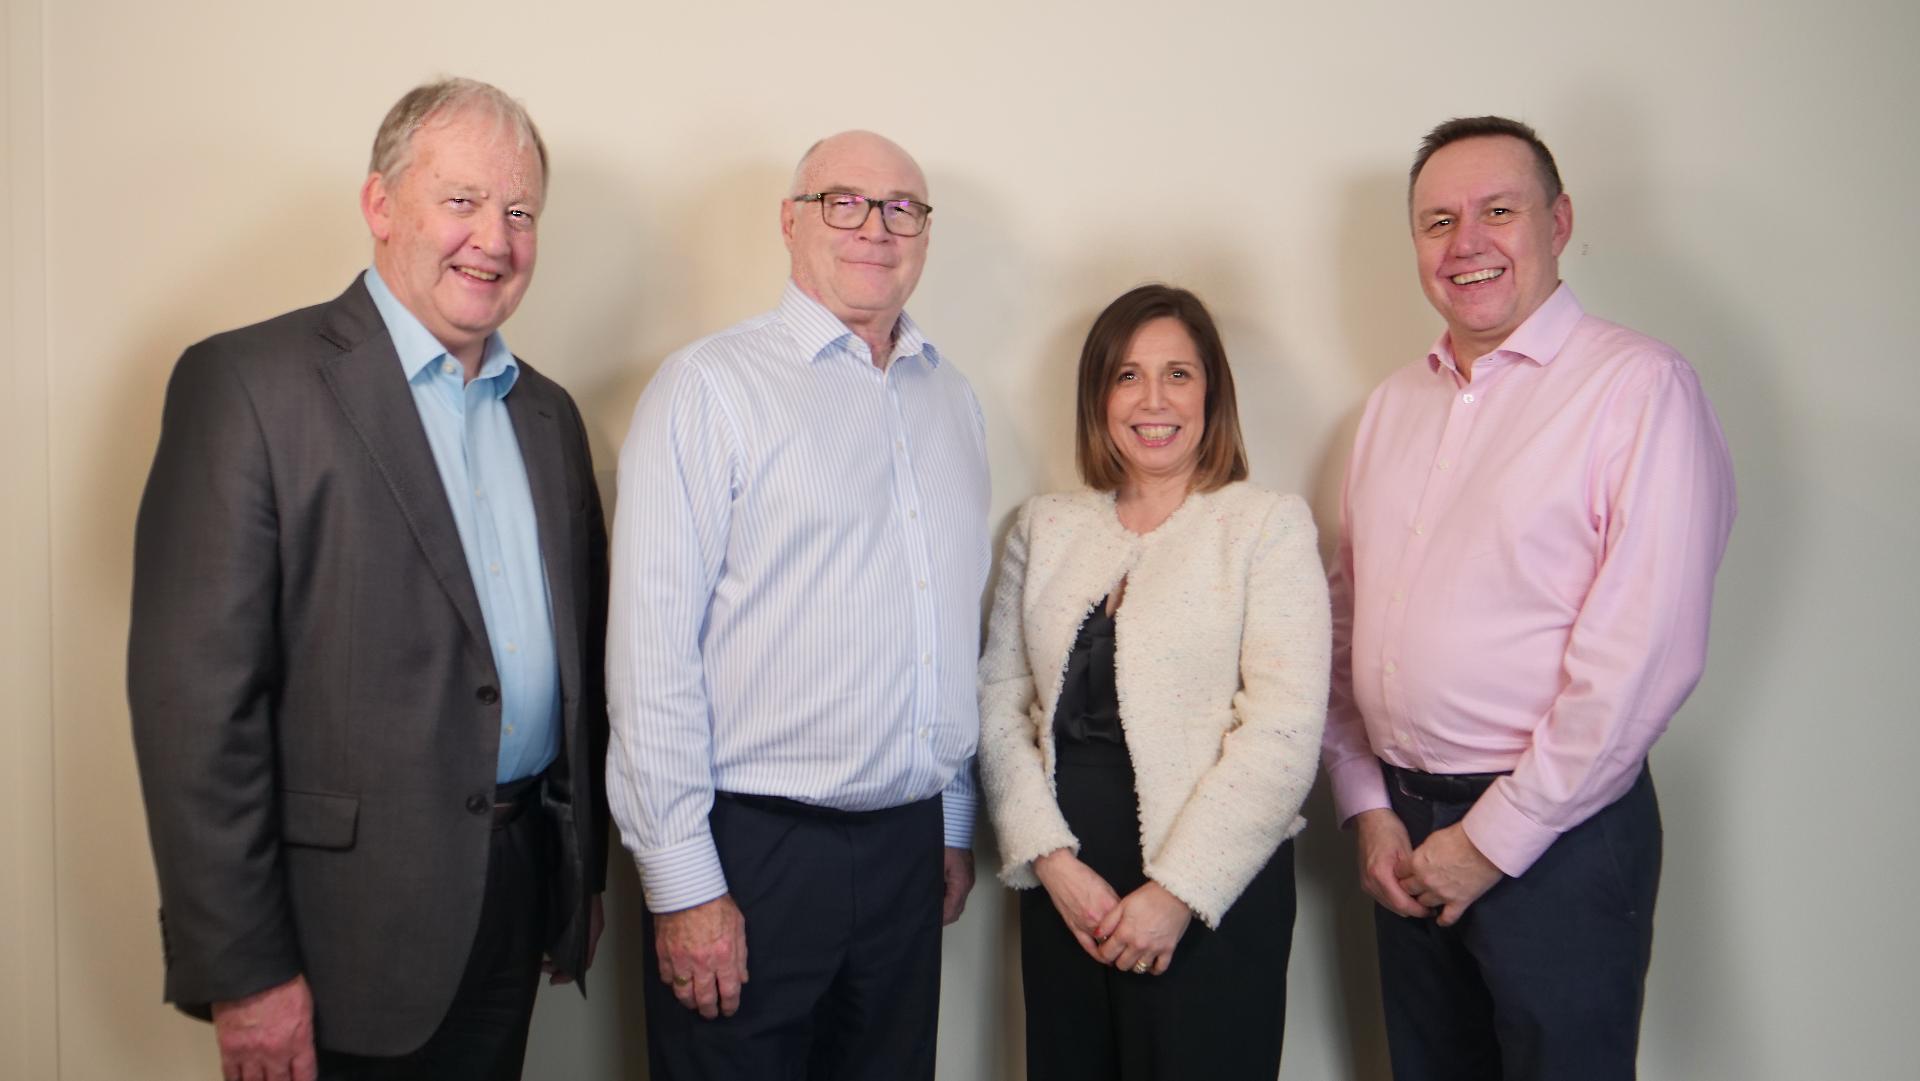 PE-backed accountancy firm completes 13th acquisition